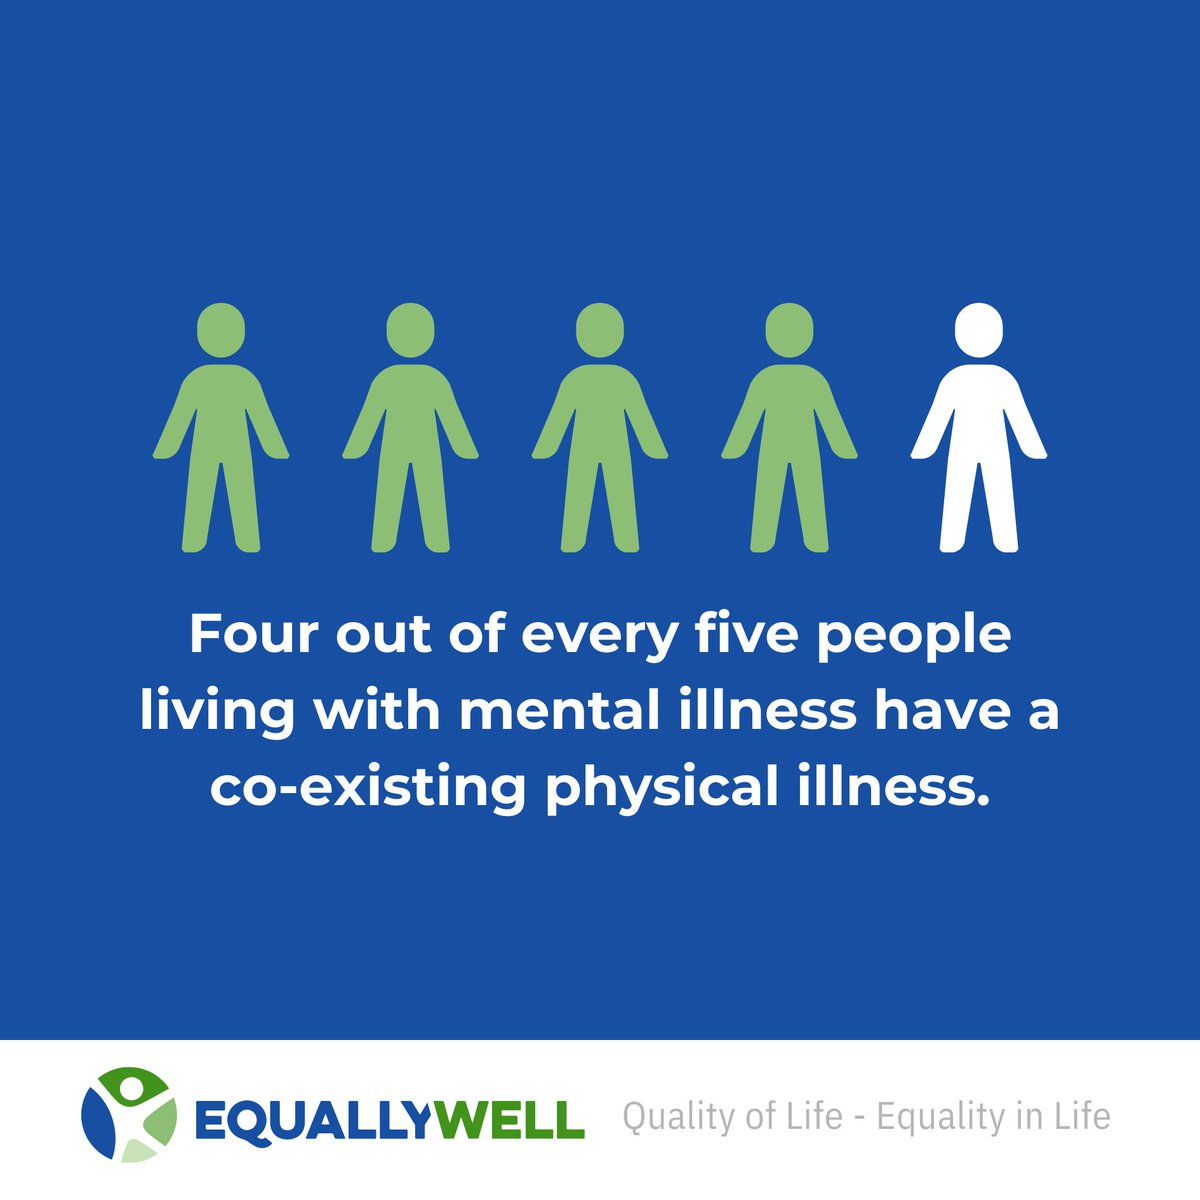 Four out of five people living with mental illness have a co-existing physical illness. Equally Well works to improve the quality of life of people living with mental illness by providing equity of access to quality health care. #NationalMentalHealthMonth #EquallyWellAu